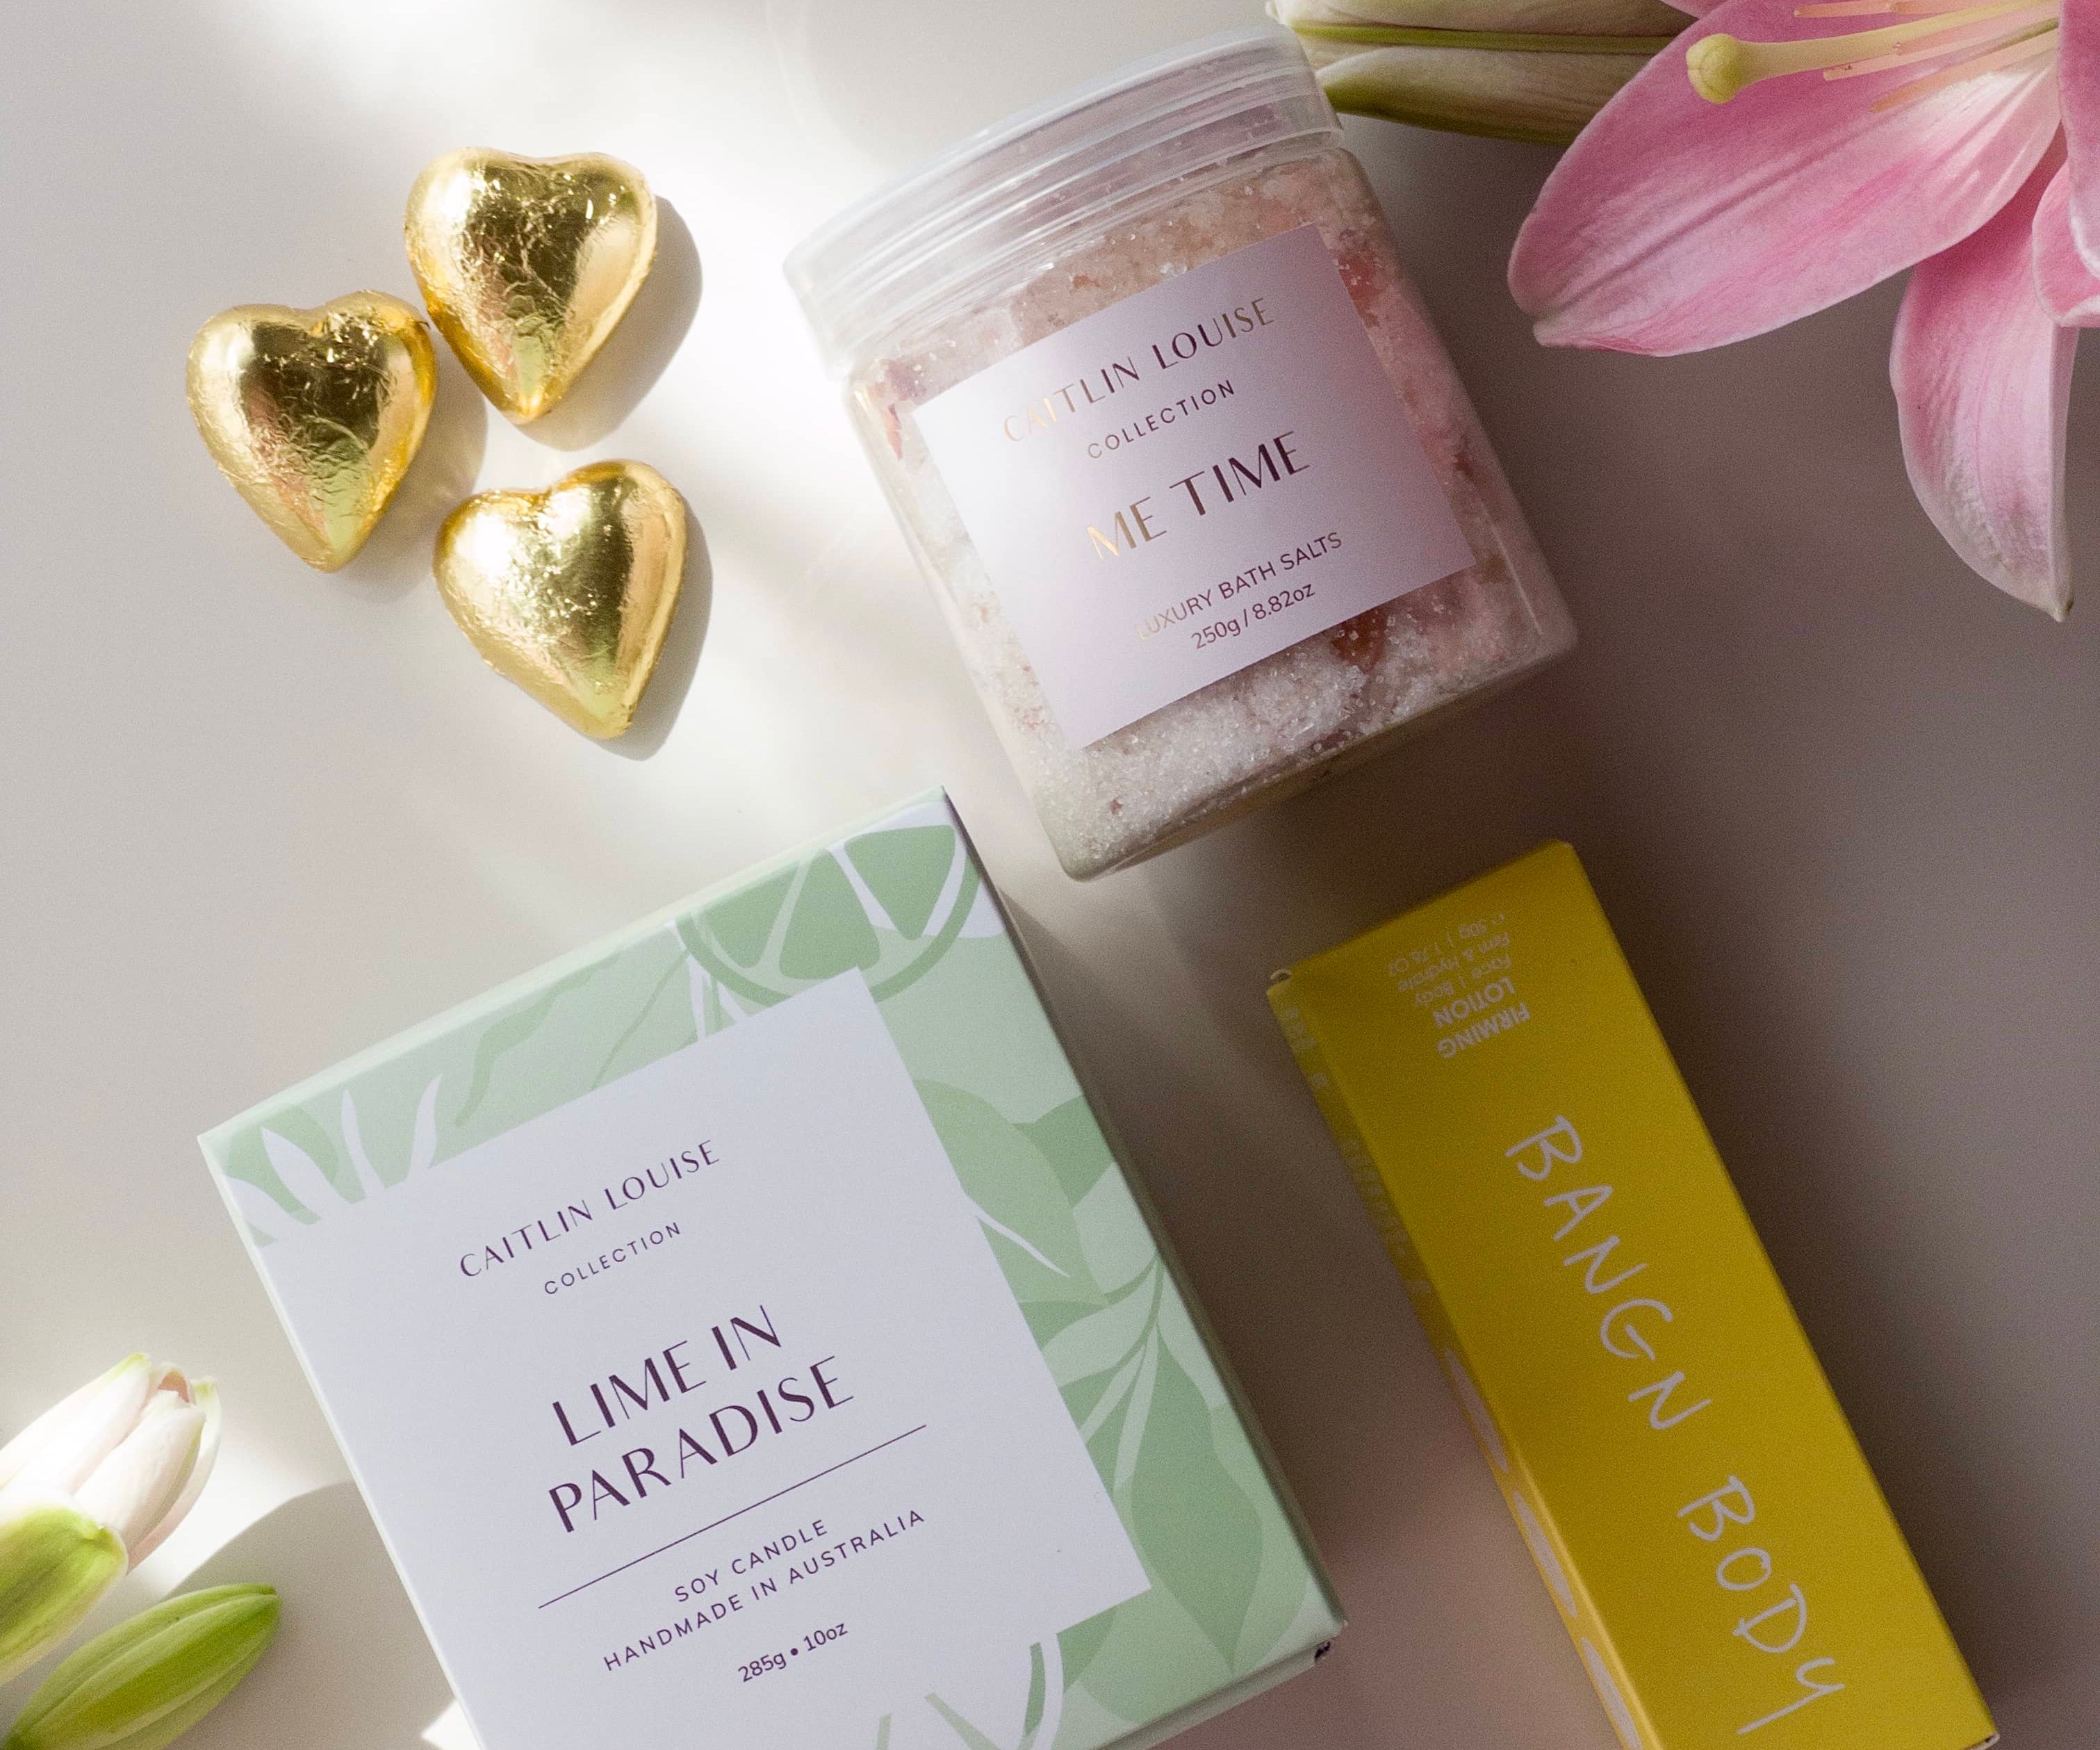 Flat lay of gift bundle for pampering - lime in paradise candle, me time bath salts, bangn body firming lotion and three heart shaped chocolates - surrounded by flowers.